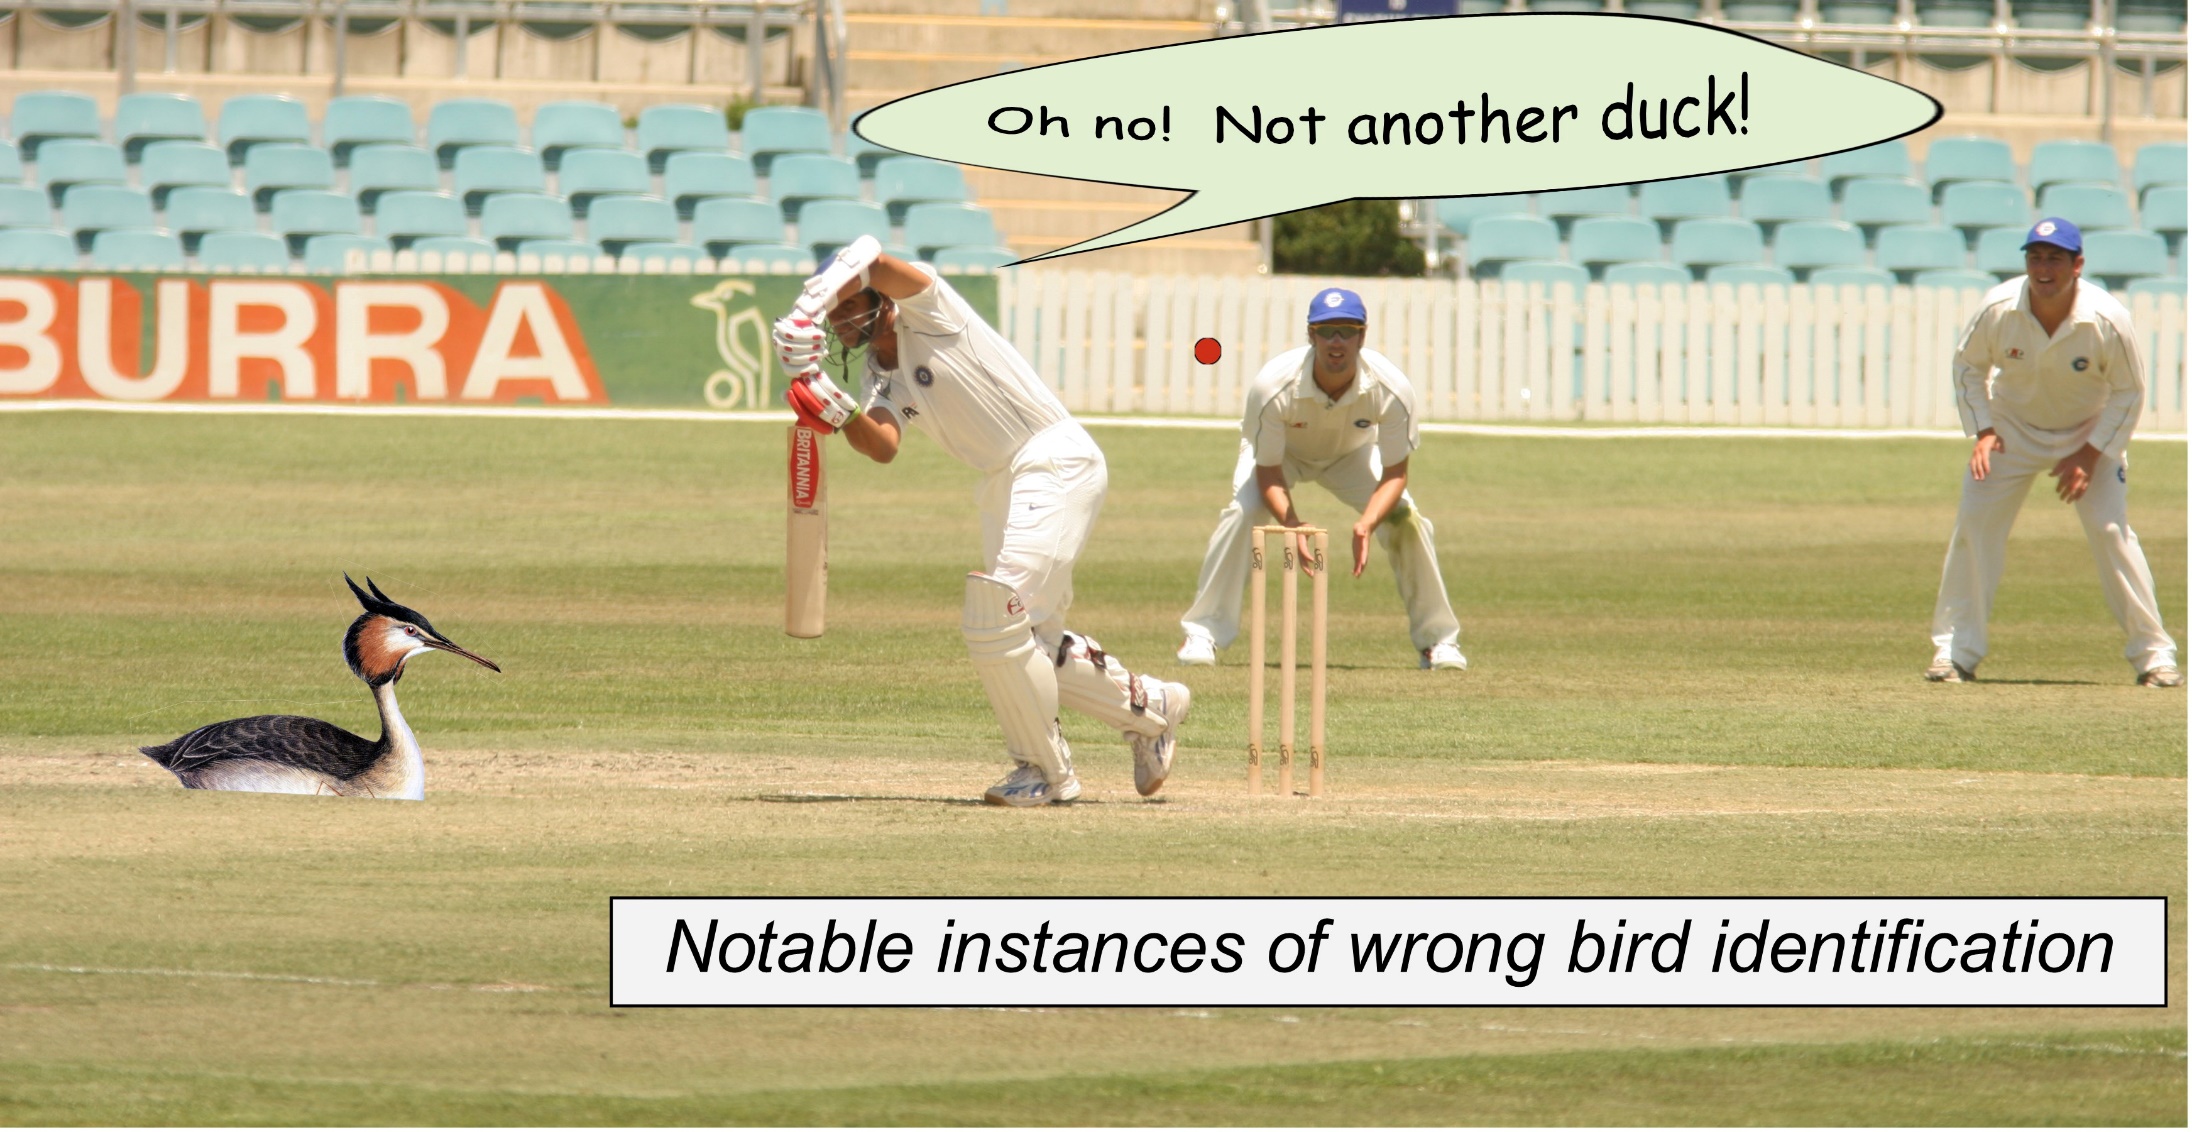 A group of men playing cricket

Description automatically generated